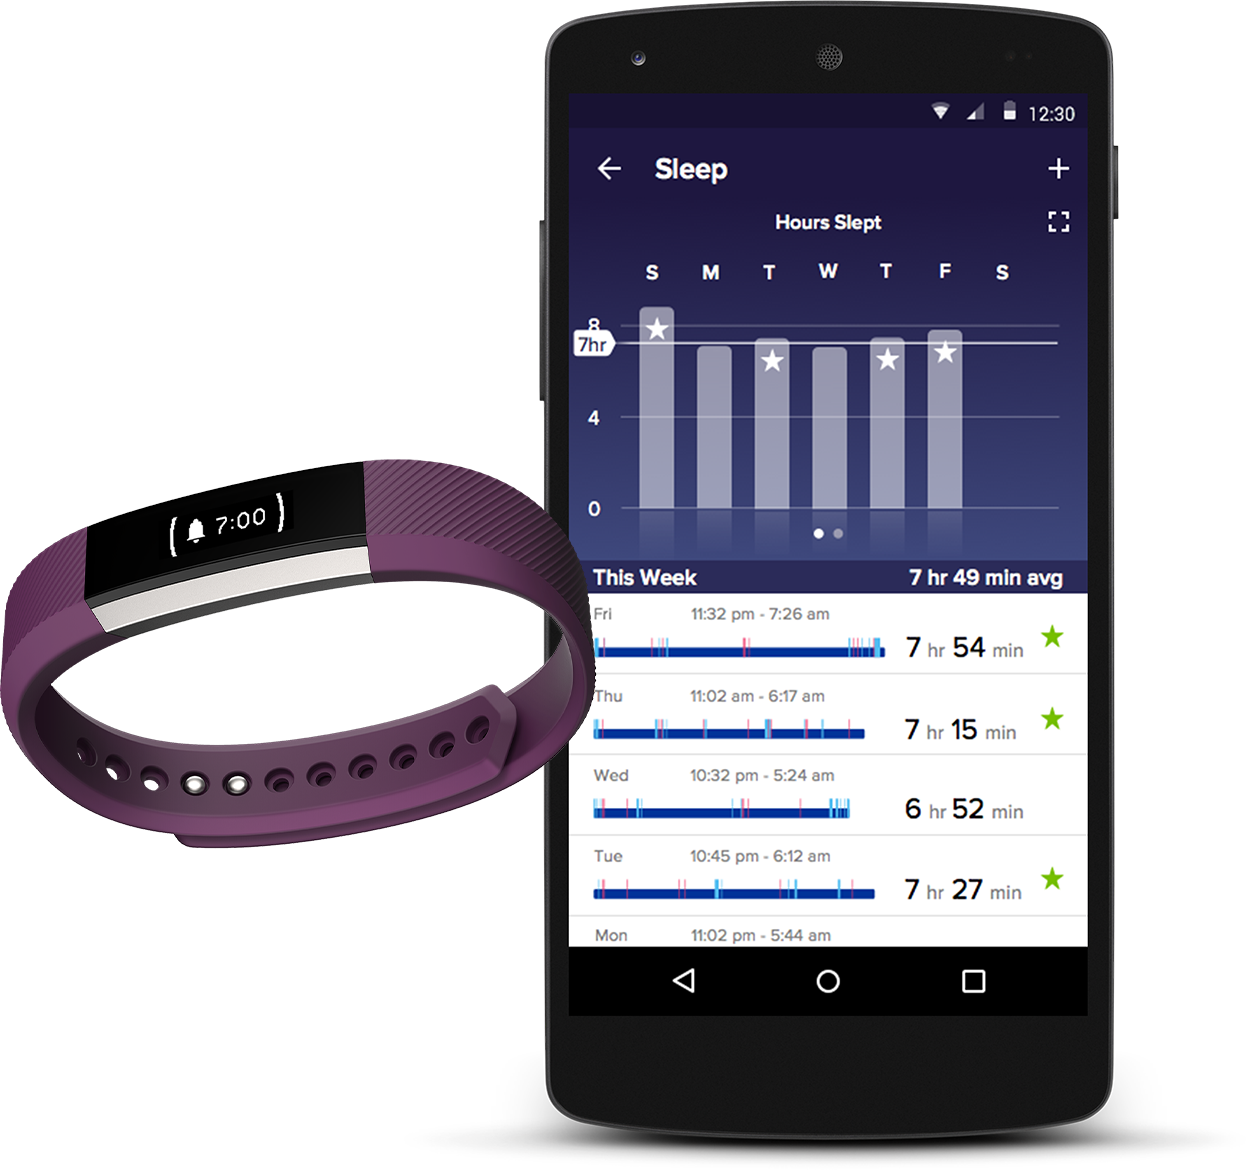 The new FitBit Alta